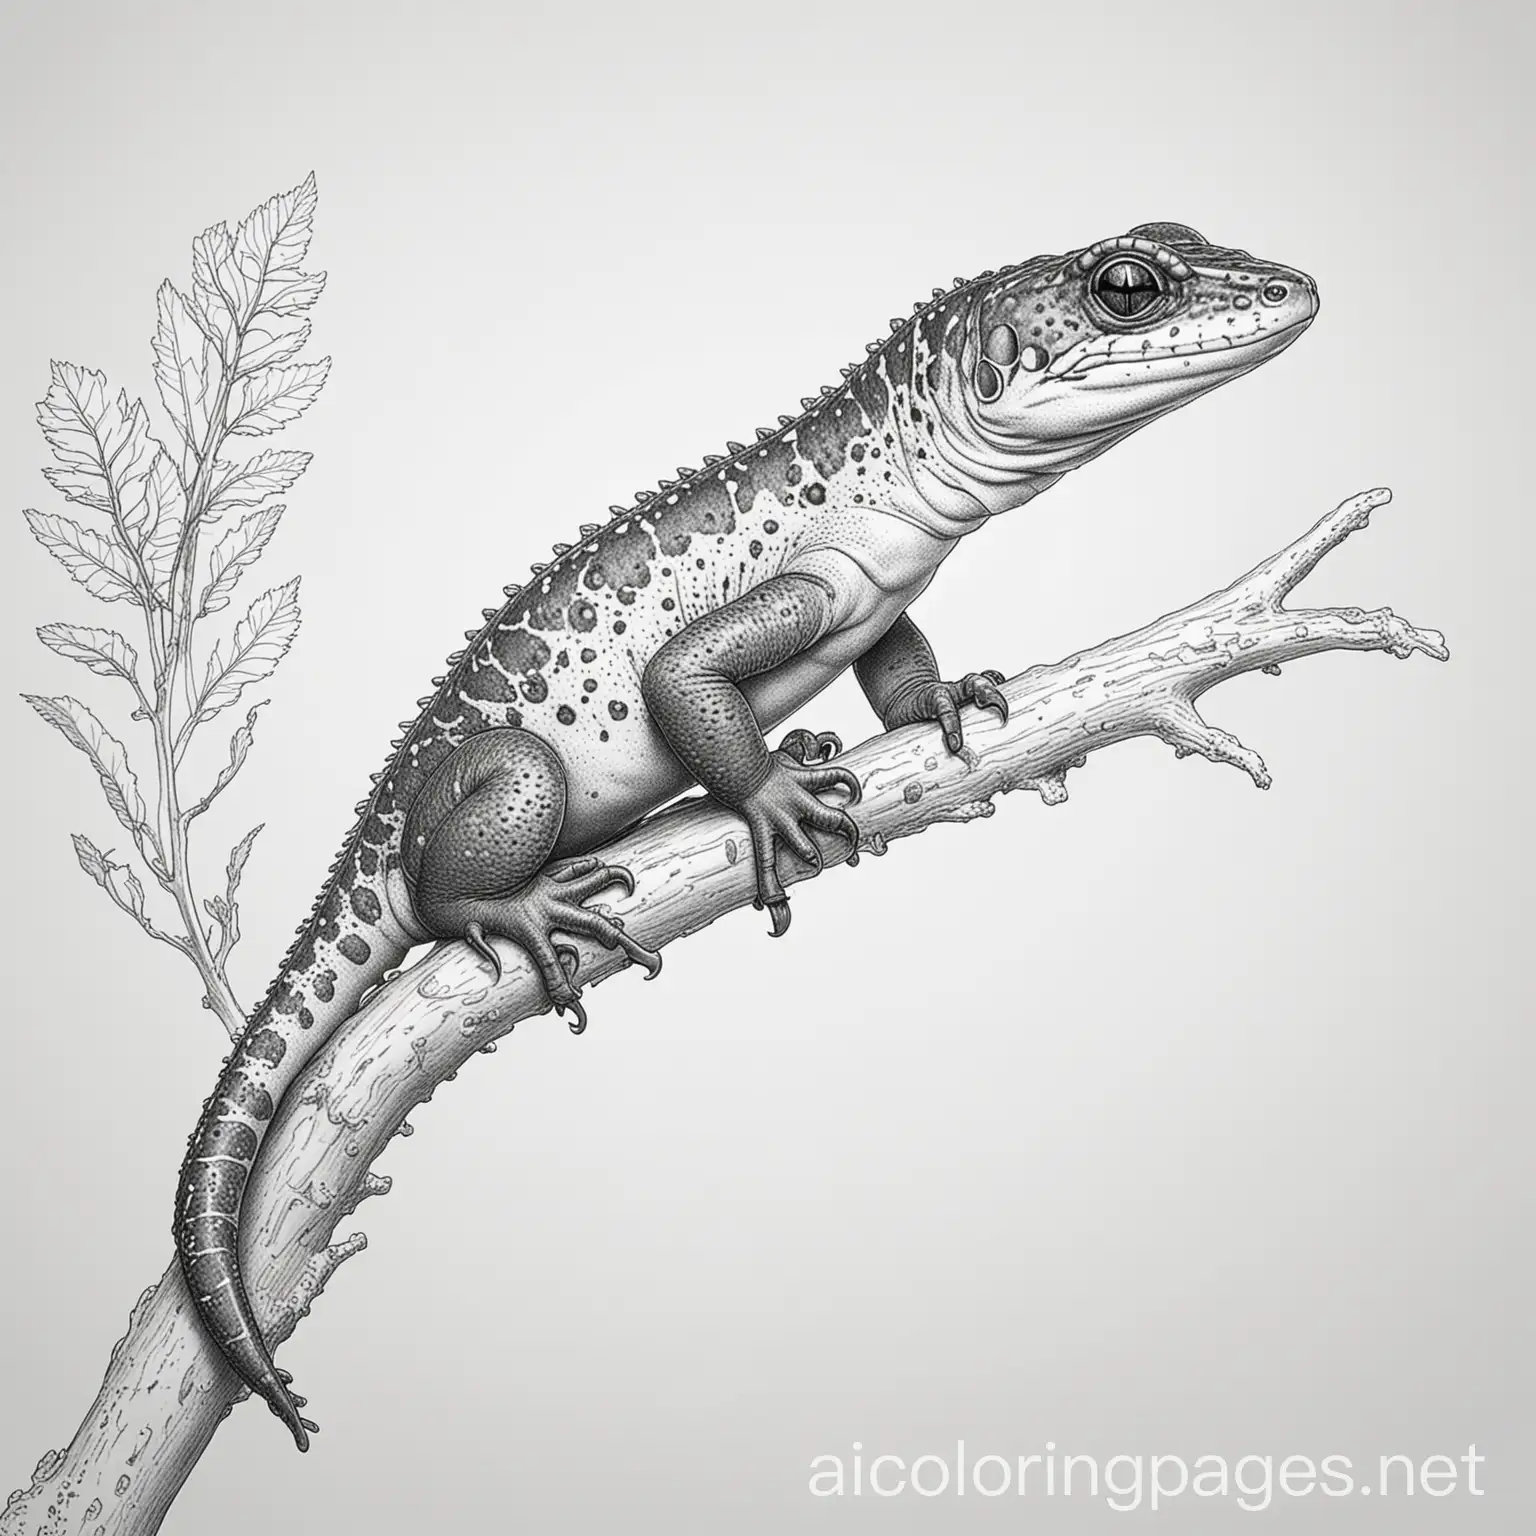 A salamander on a branch, Coloring Page, black and white, line art, white background, Simplicity, Ample White Space